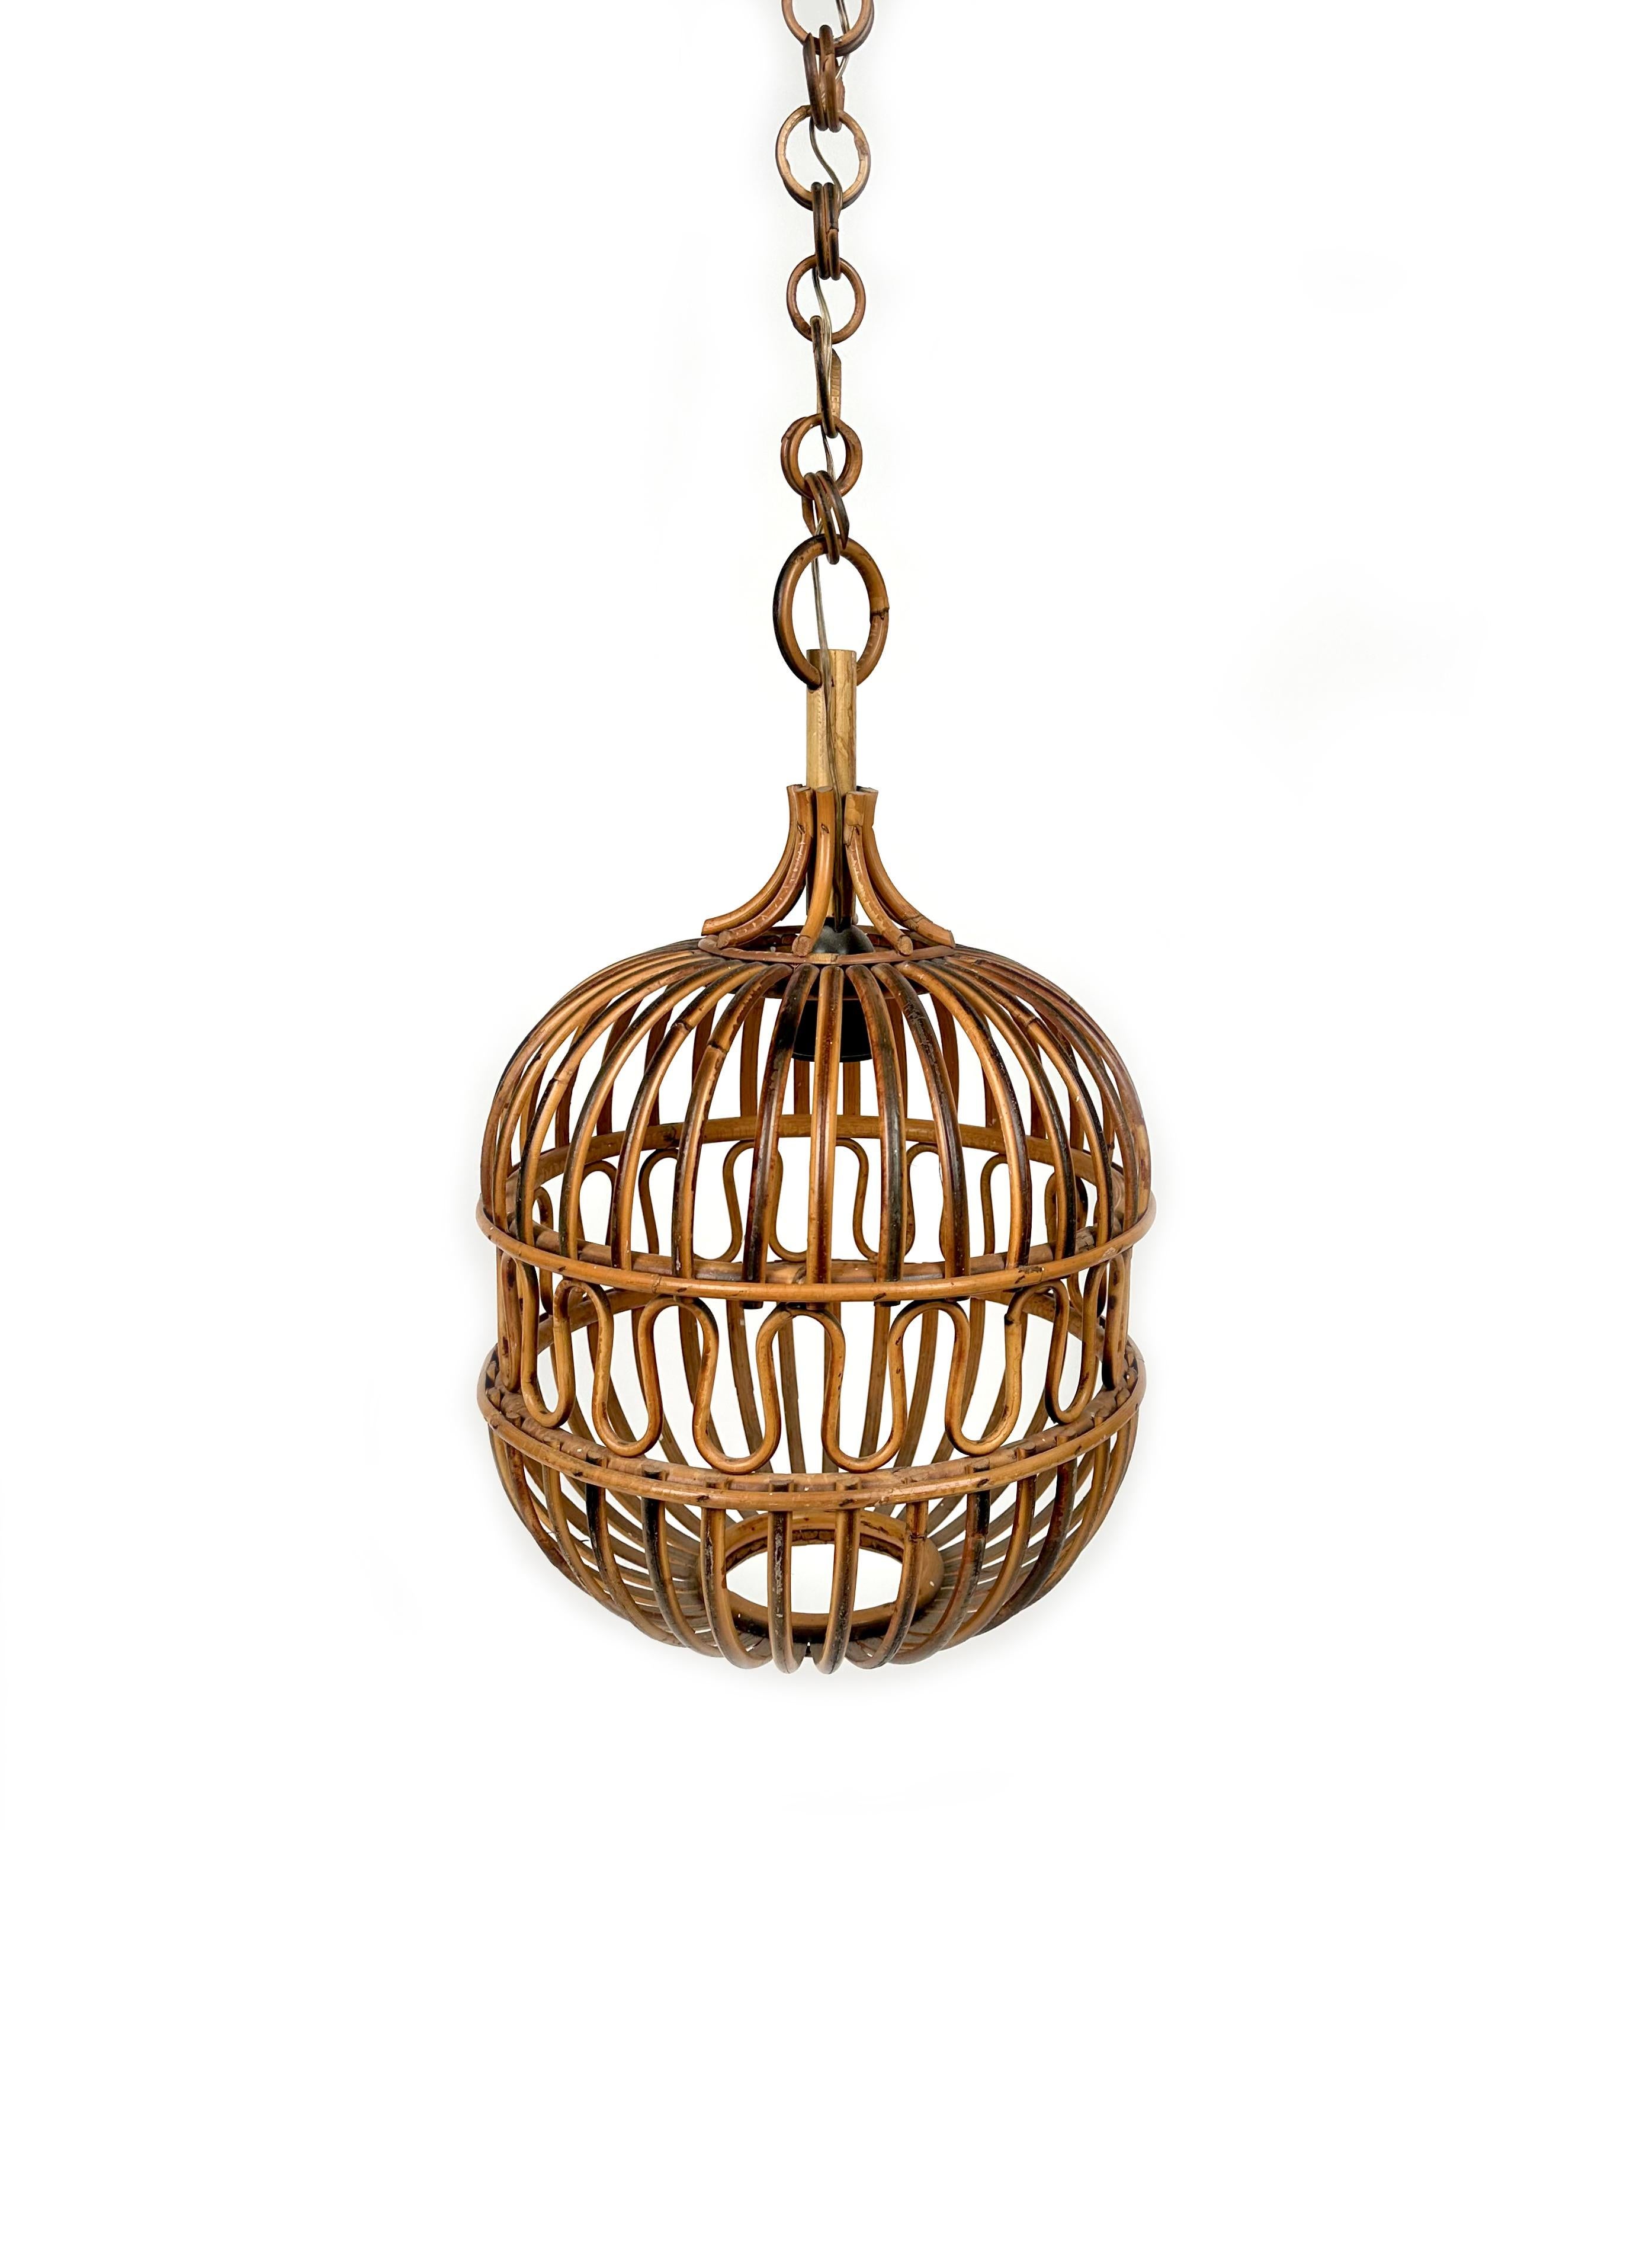 Midcentury chandelier lantern in rattan and bamboo. 

Made in Italy in the 1960s. 

This suspension lamp is entirely handcrafted with rattan and bamboo. The ball shaped shade hangs from a chain with round rattan links which can be shortened to